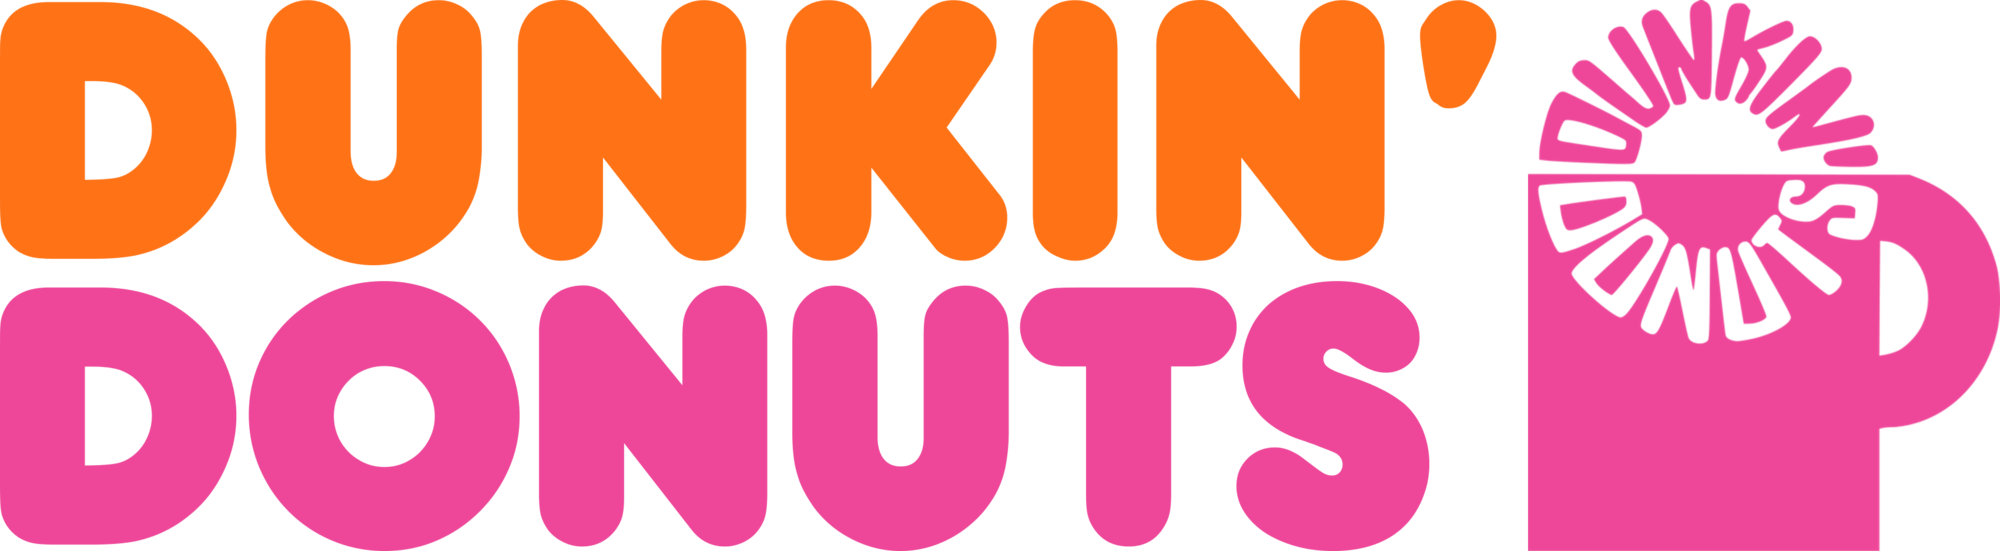 Dunkin Donuts Clipart Building - Dunkin Donuts Clipart Building (2000x551)